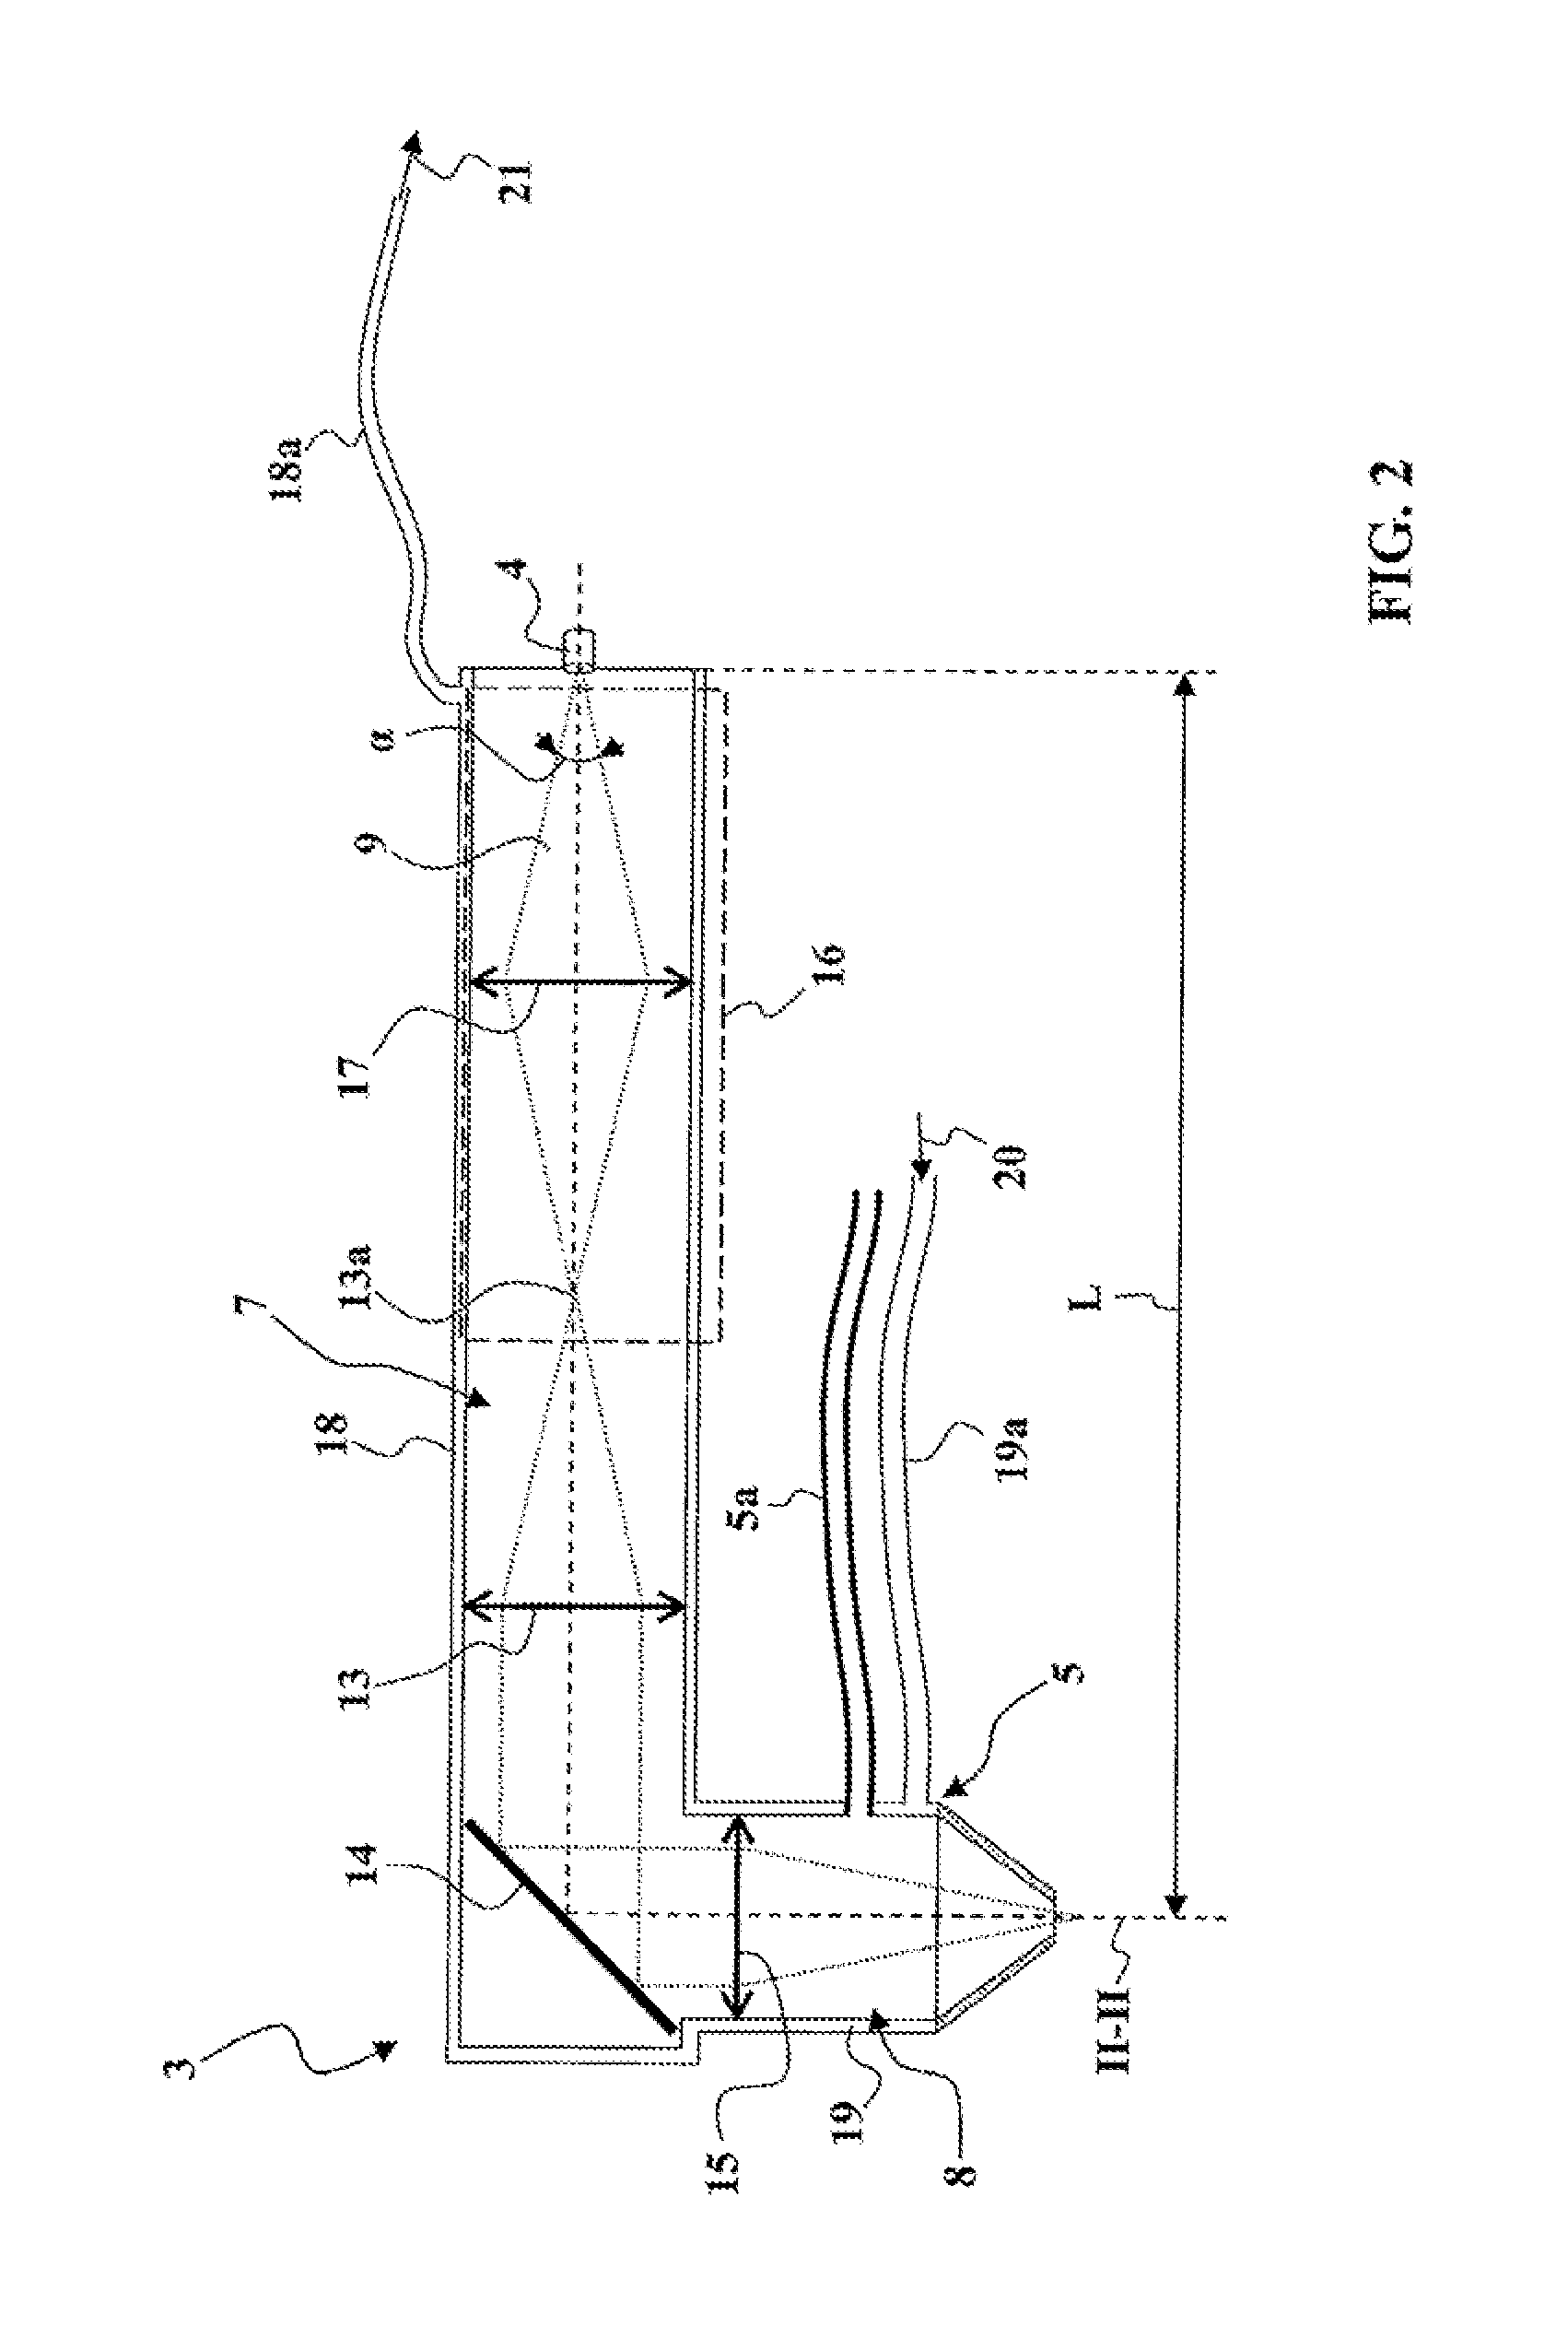 Concave laser-resurfaced part, method and device for producing it